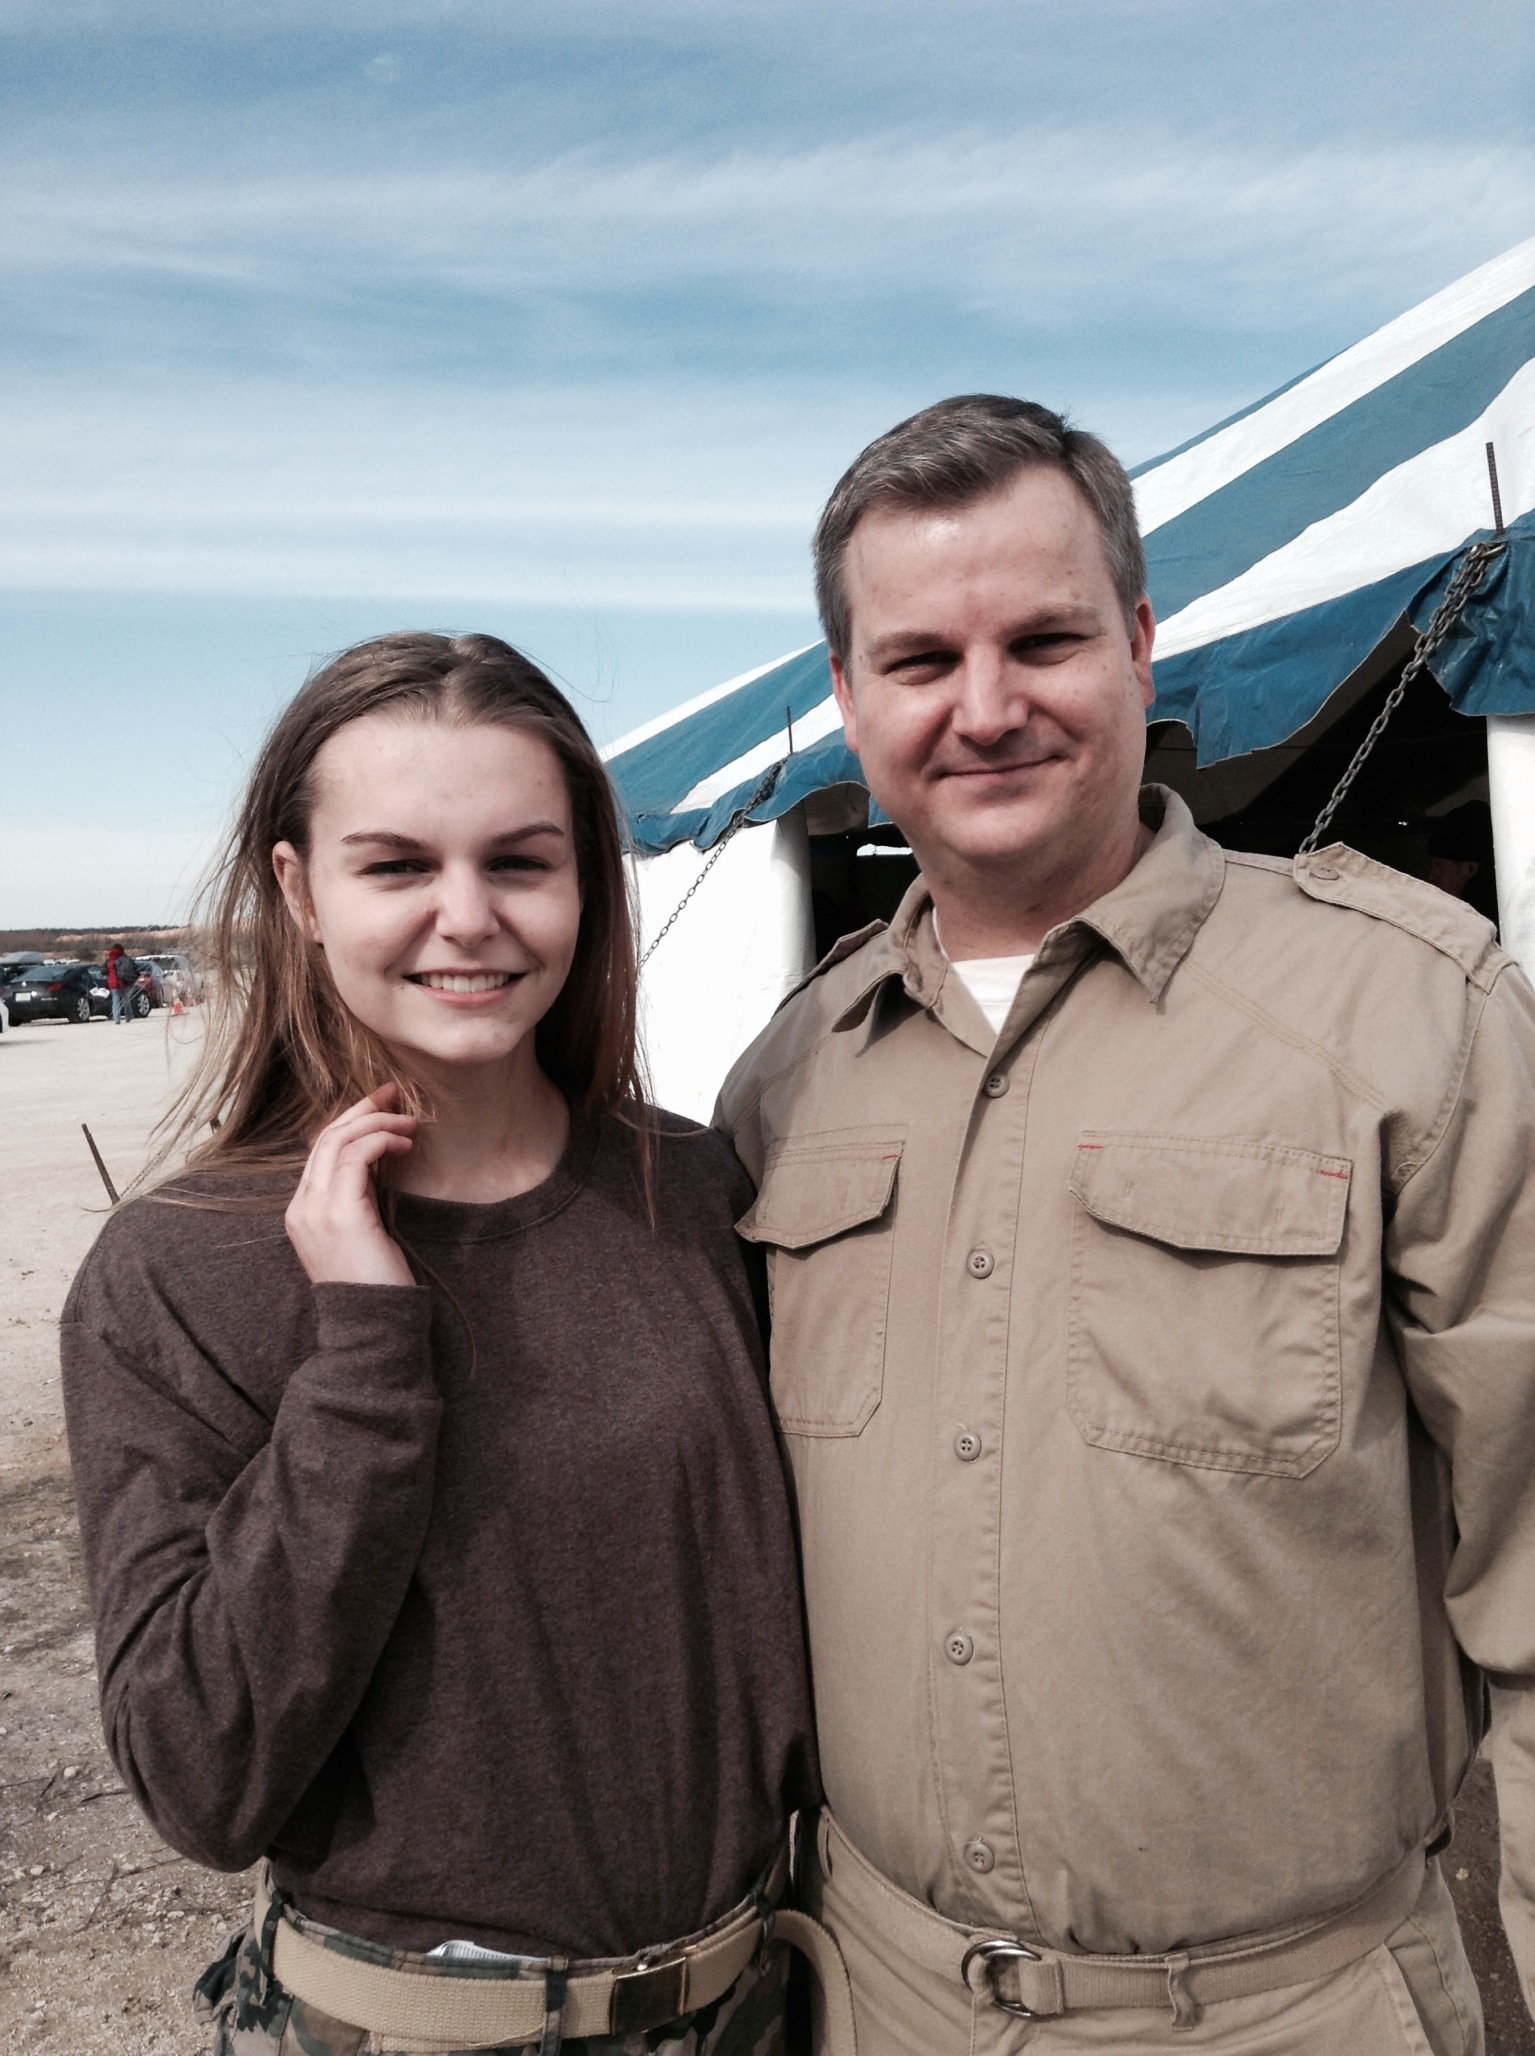 Me and my daughter Meagan on the set of Revolution